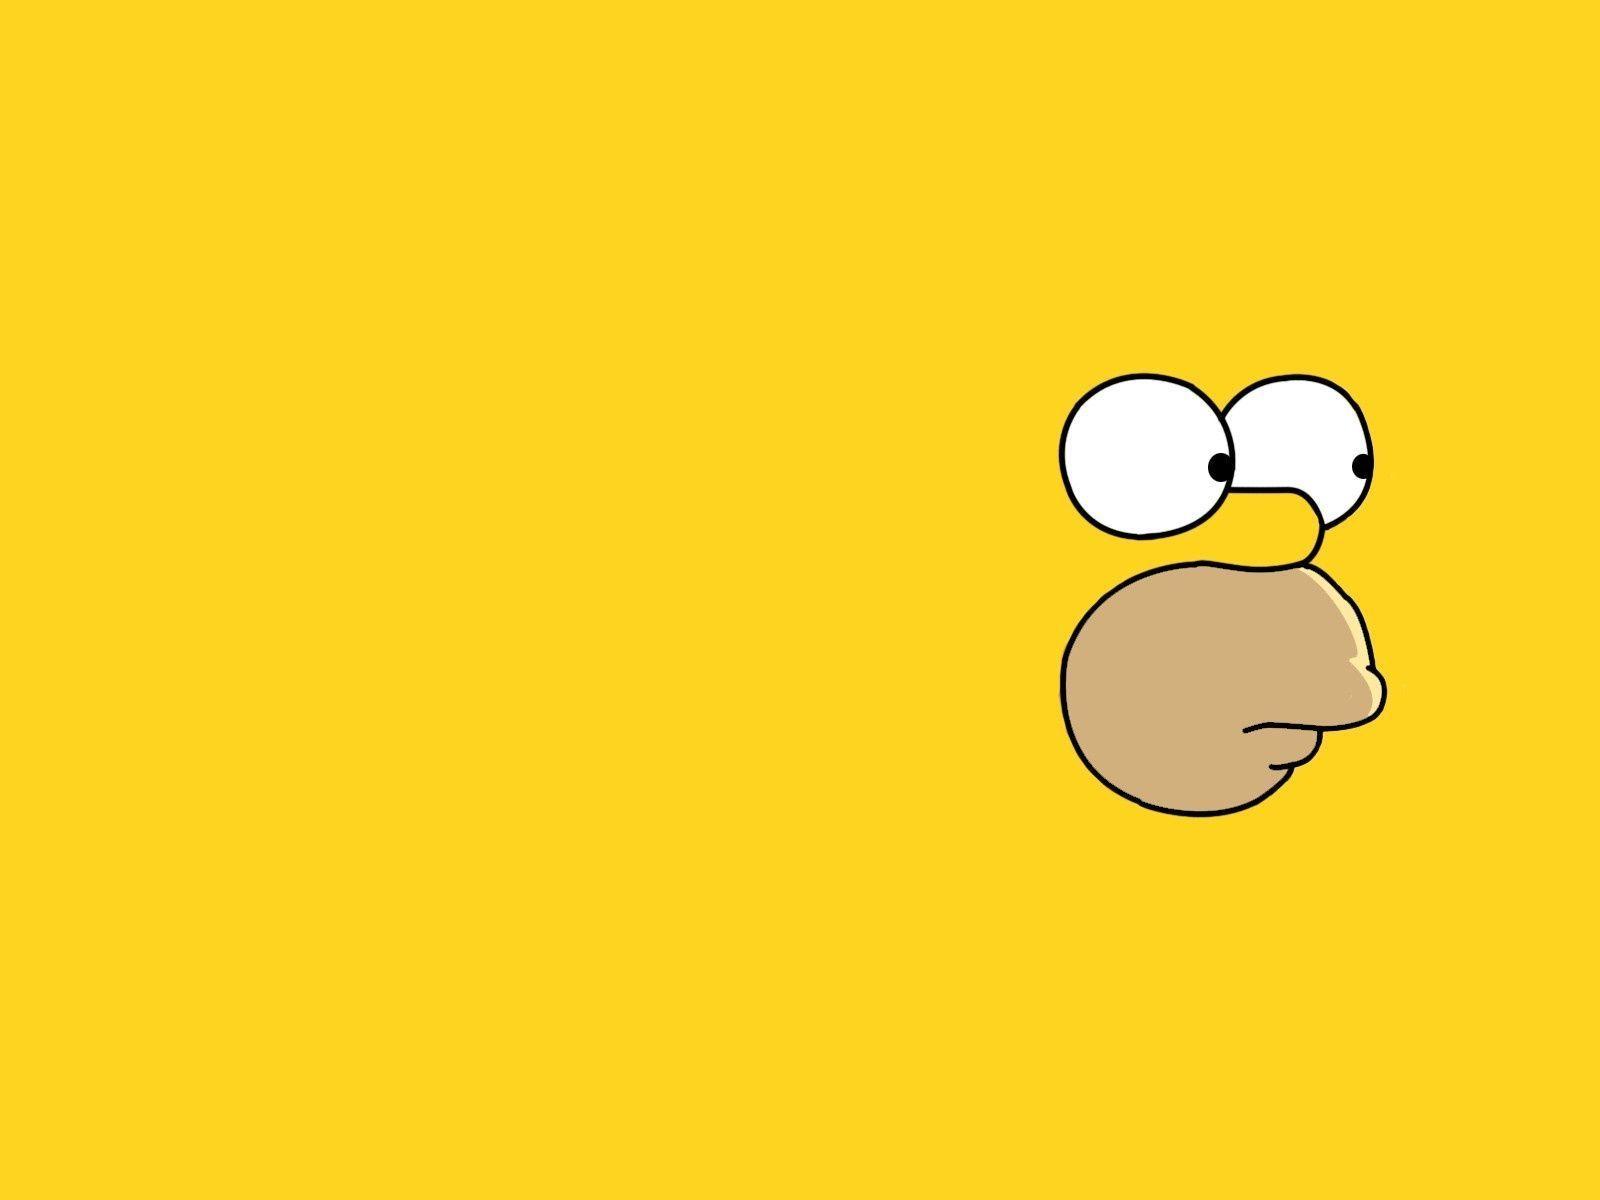 The Simpsons Wallpaper 1920 X 1080: Wallpaper For Gt Simpsons